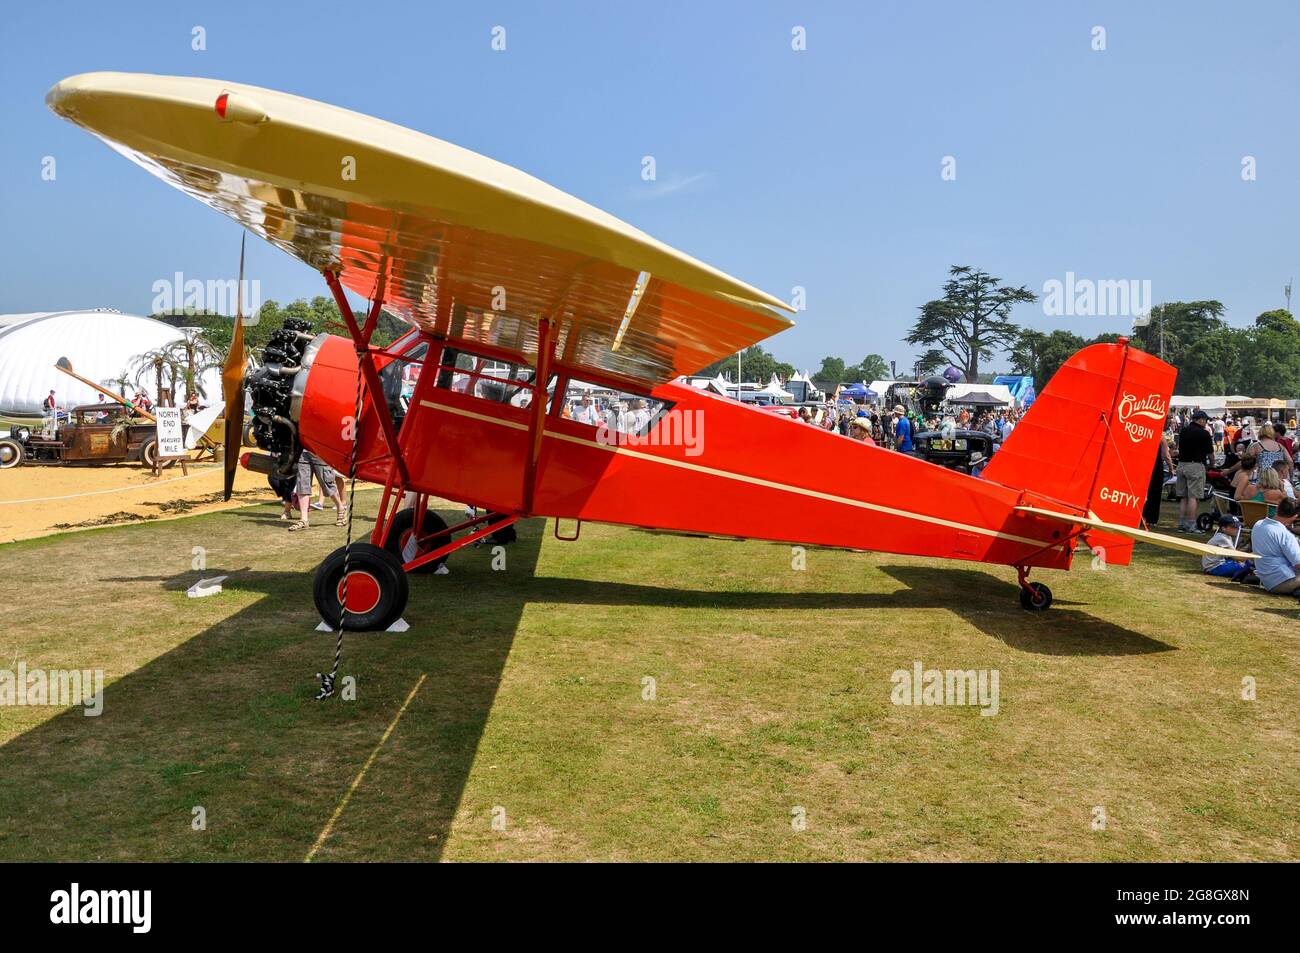 Curtiss Robin high wing monoplane G-BTYY at the Goodwood Festival of Speed event, UK. Curtiss Robertson C-2 Robin built 1929 Stock Photo